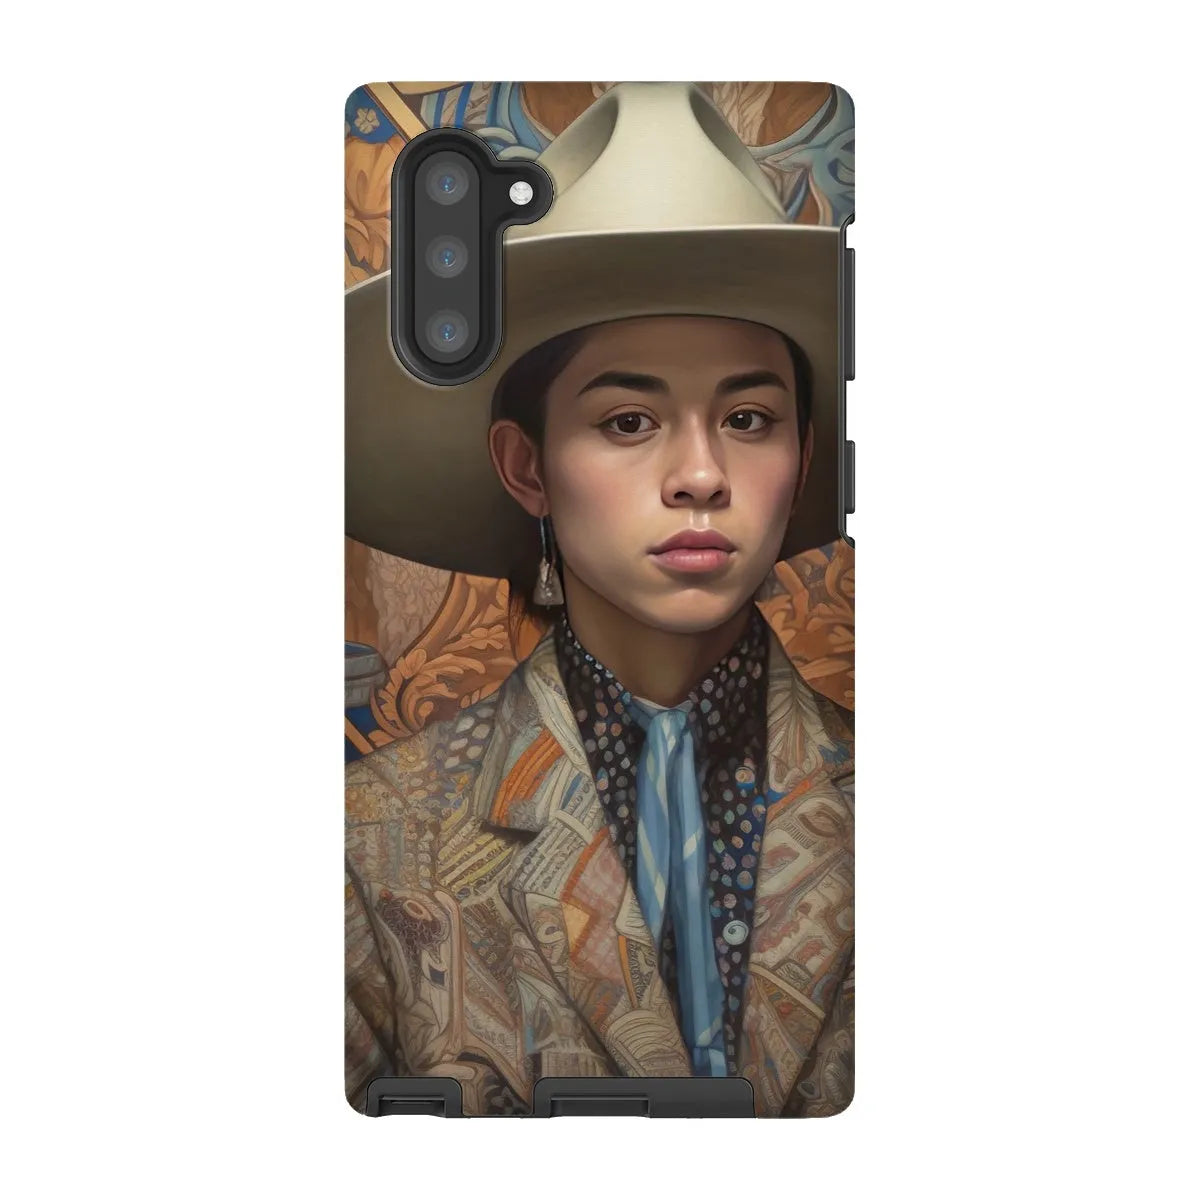 Angel The Transgender Cowboy - F2m Outlaw Art Phone Case - Samsung Galaxy Note 10 / Matte - Mobile Phone Cases